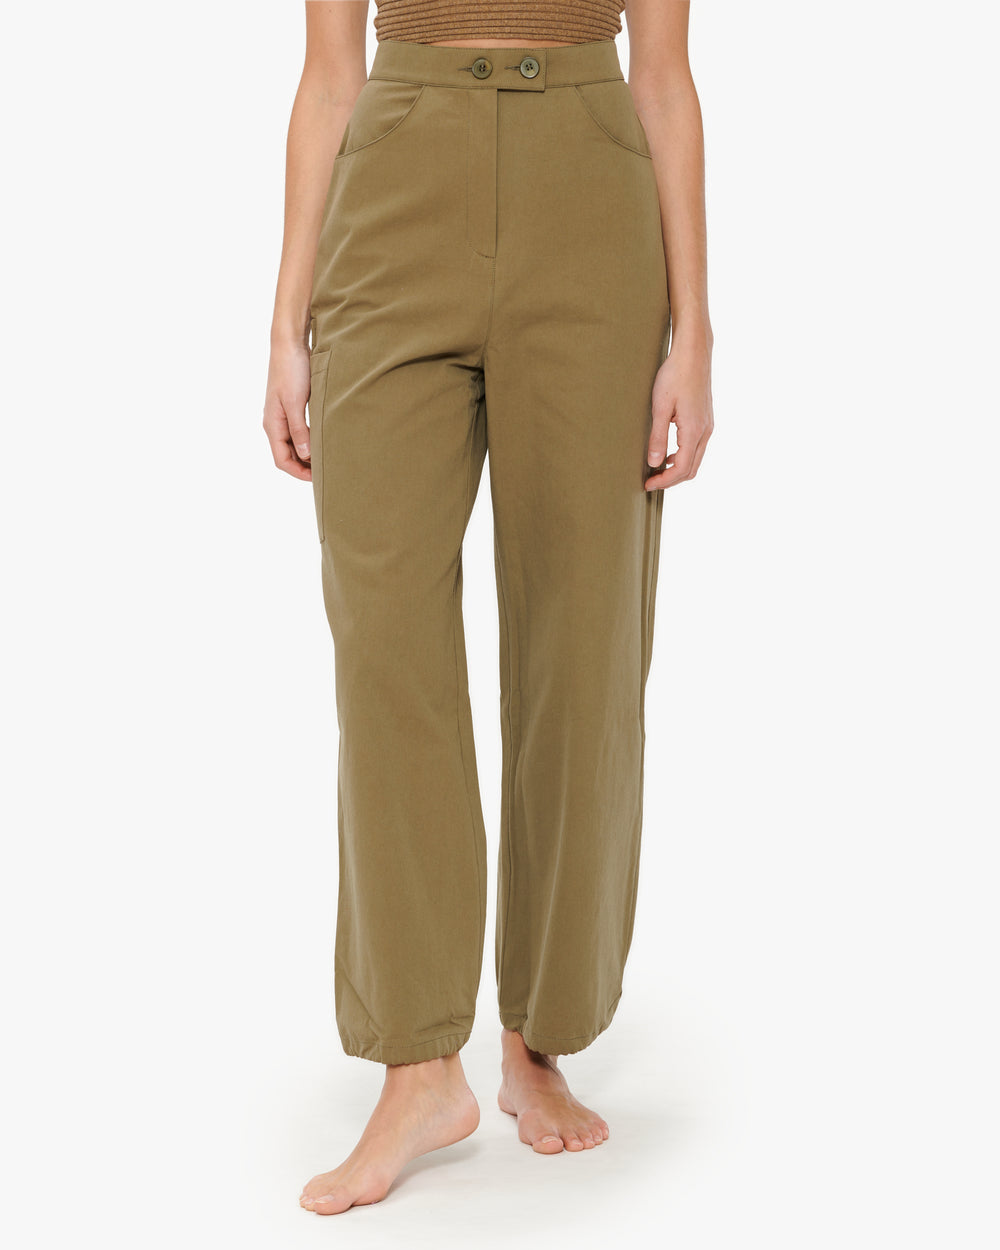 The Range Military Twill Cinched Cargo Pants